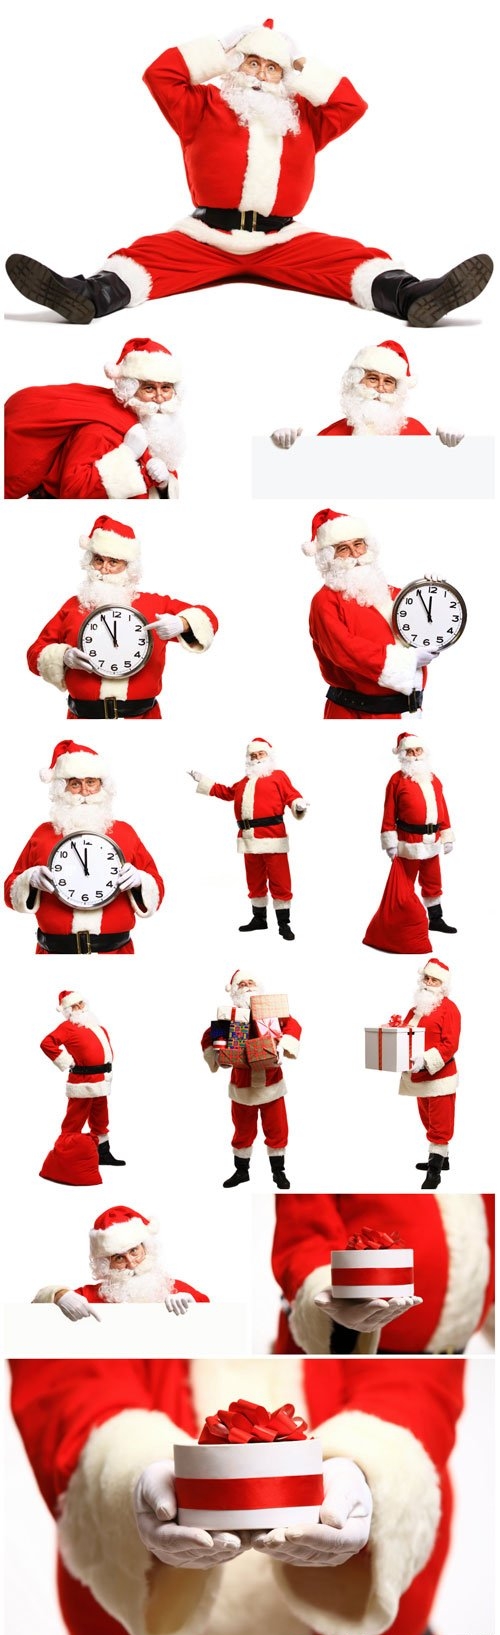 New Year and Christmas stock photos - 14